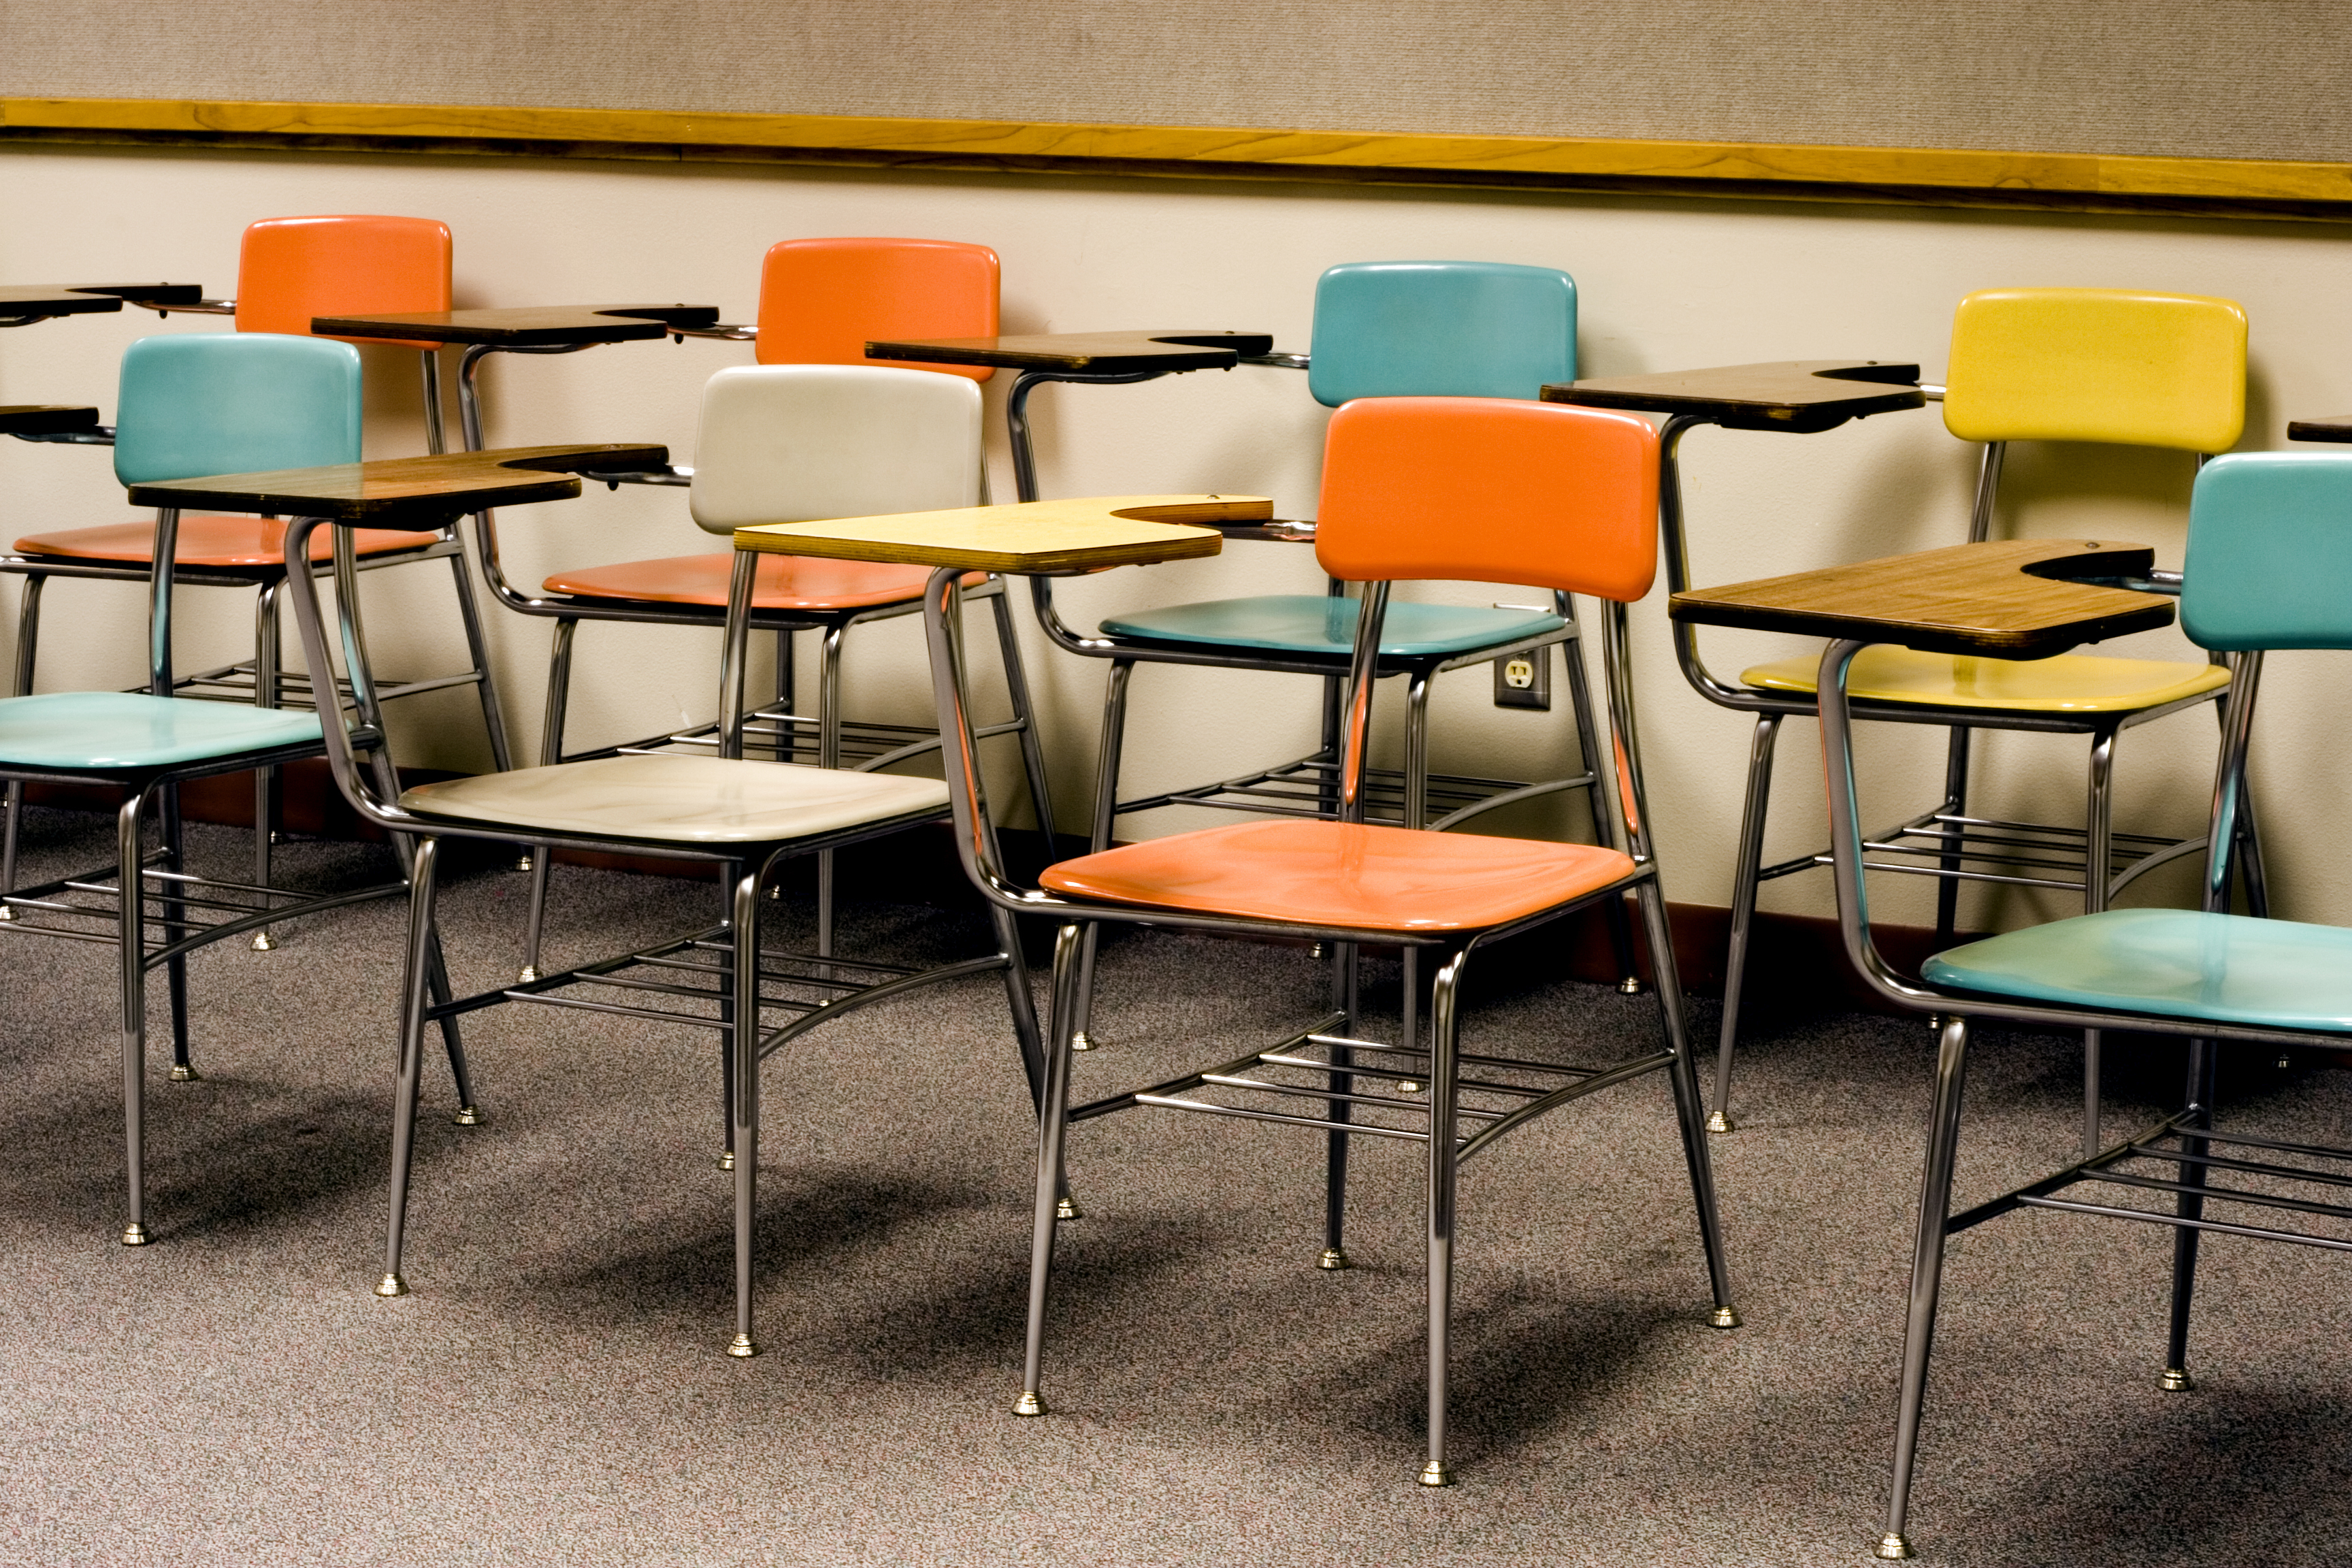 Photograph of two rows of empty desks inside a classroom.